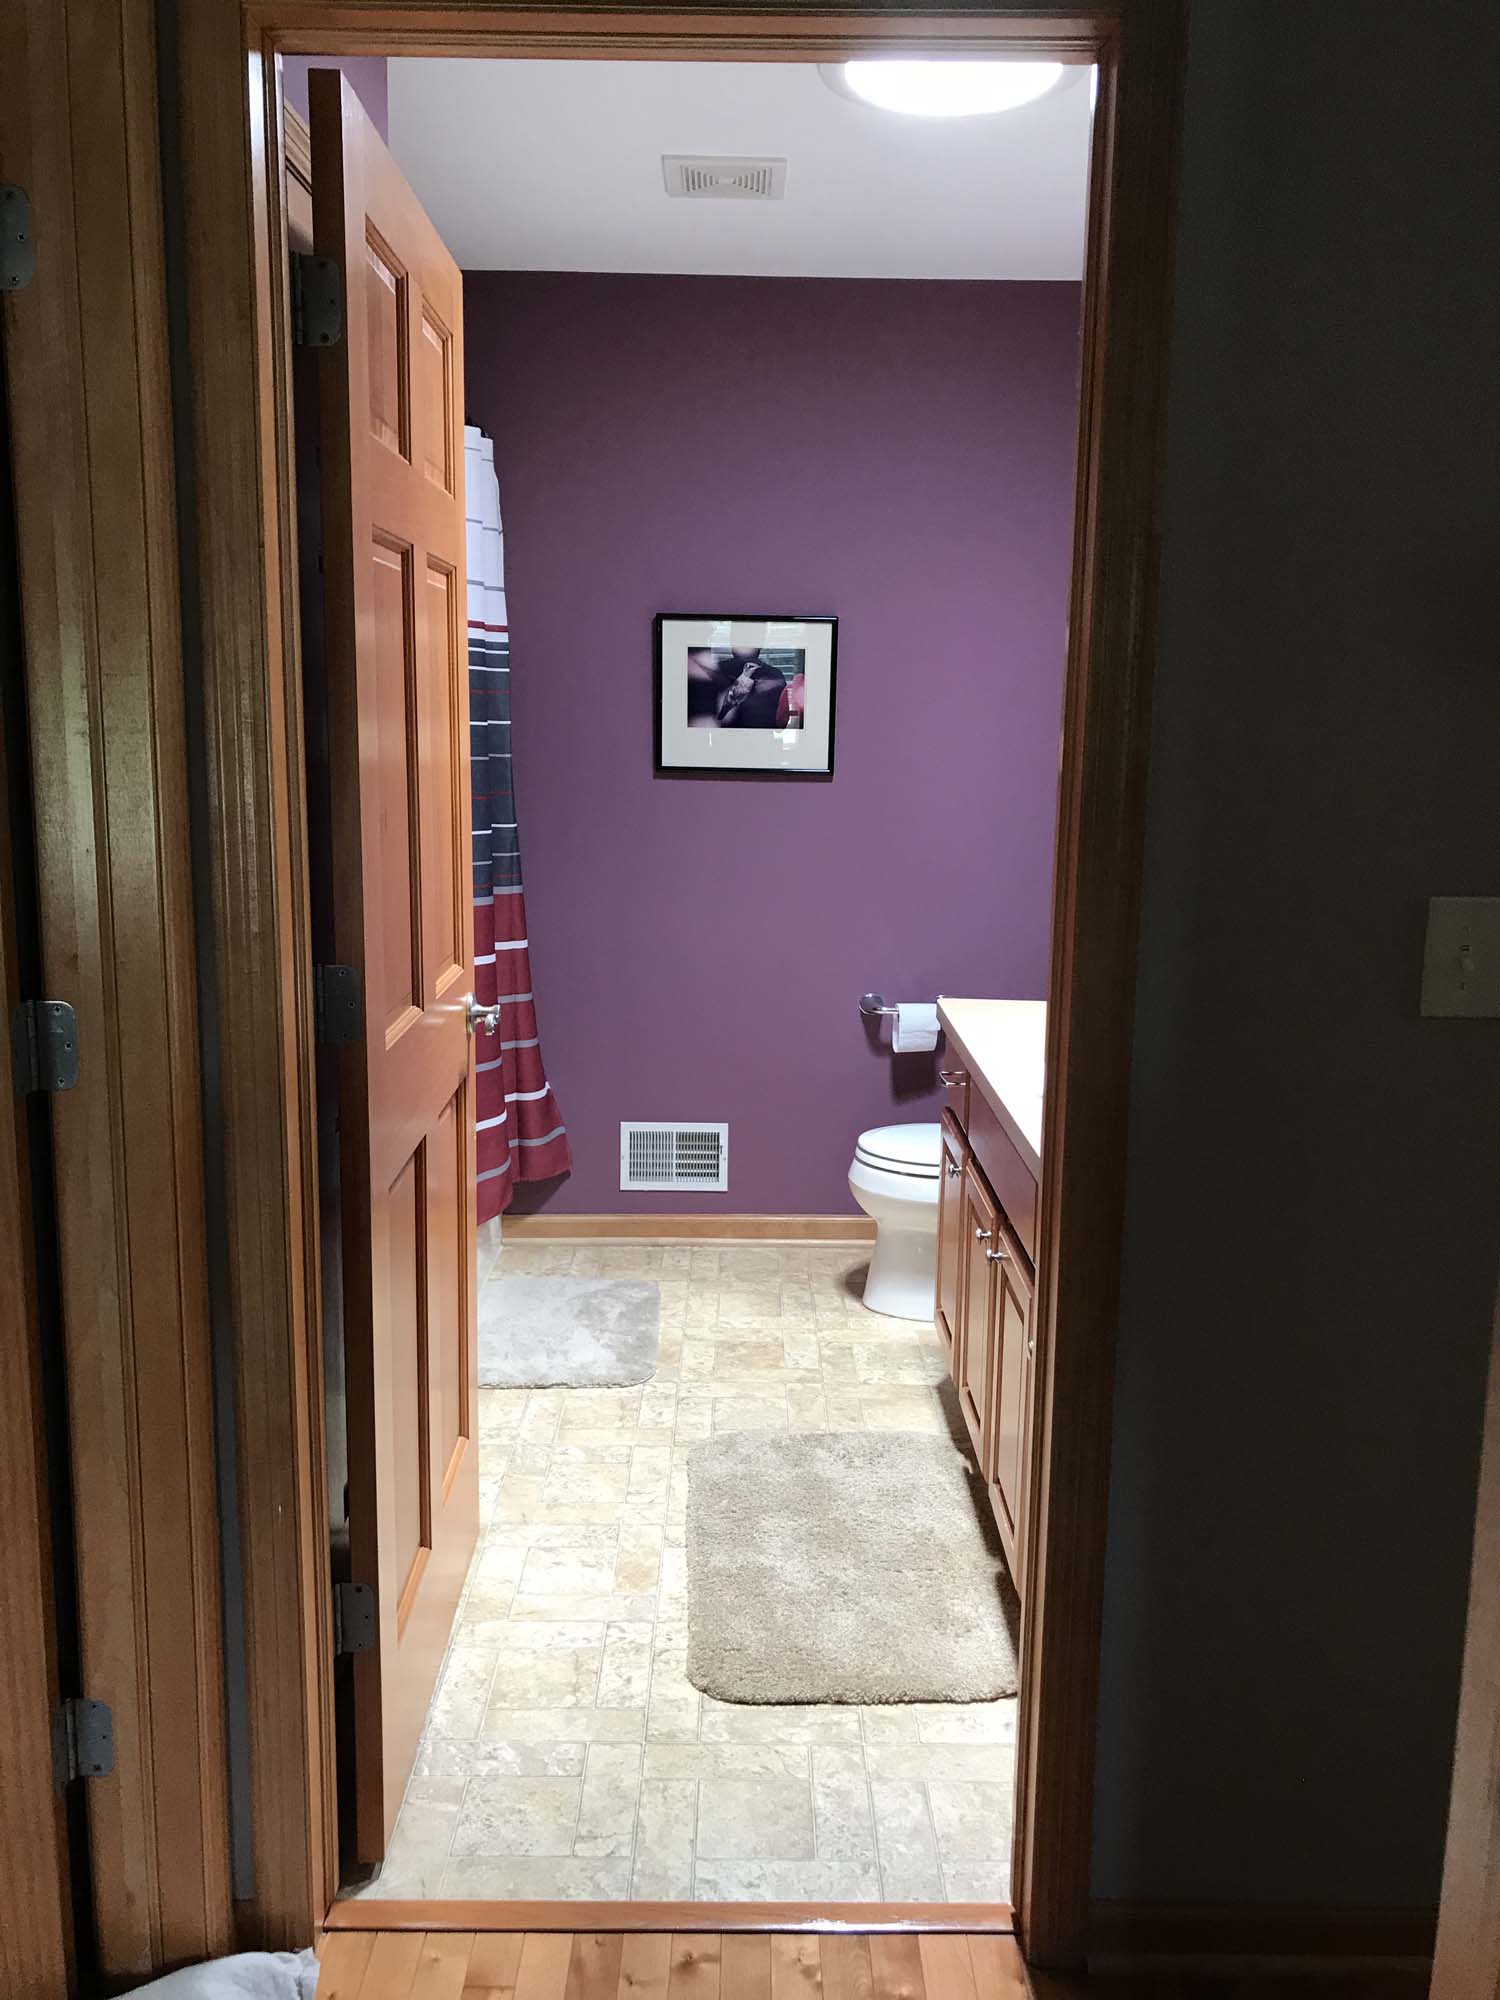 Circular VELUX sun tunnel skylight shines in on a lavender colored hall bathroom installed by Wisconsin Sunlight Solutions.